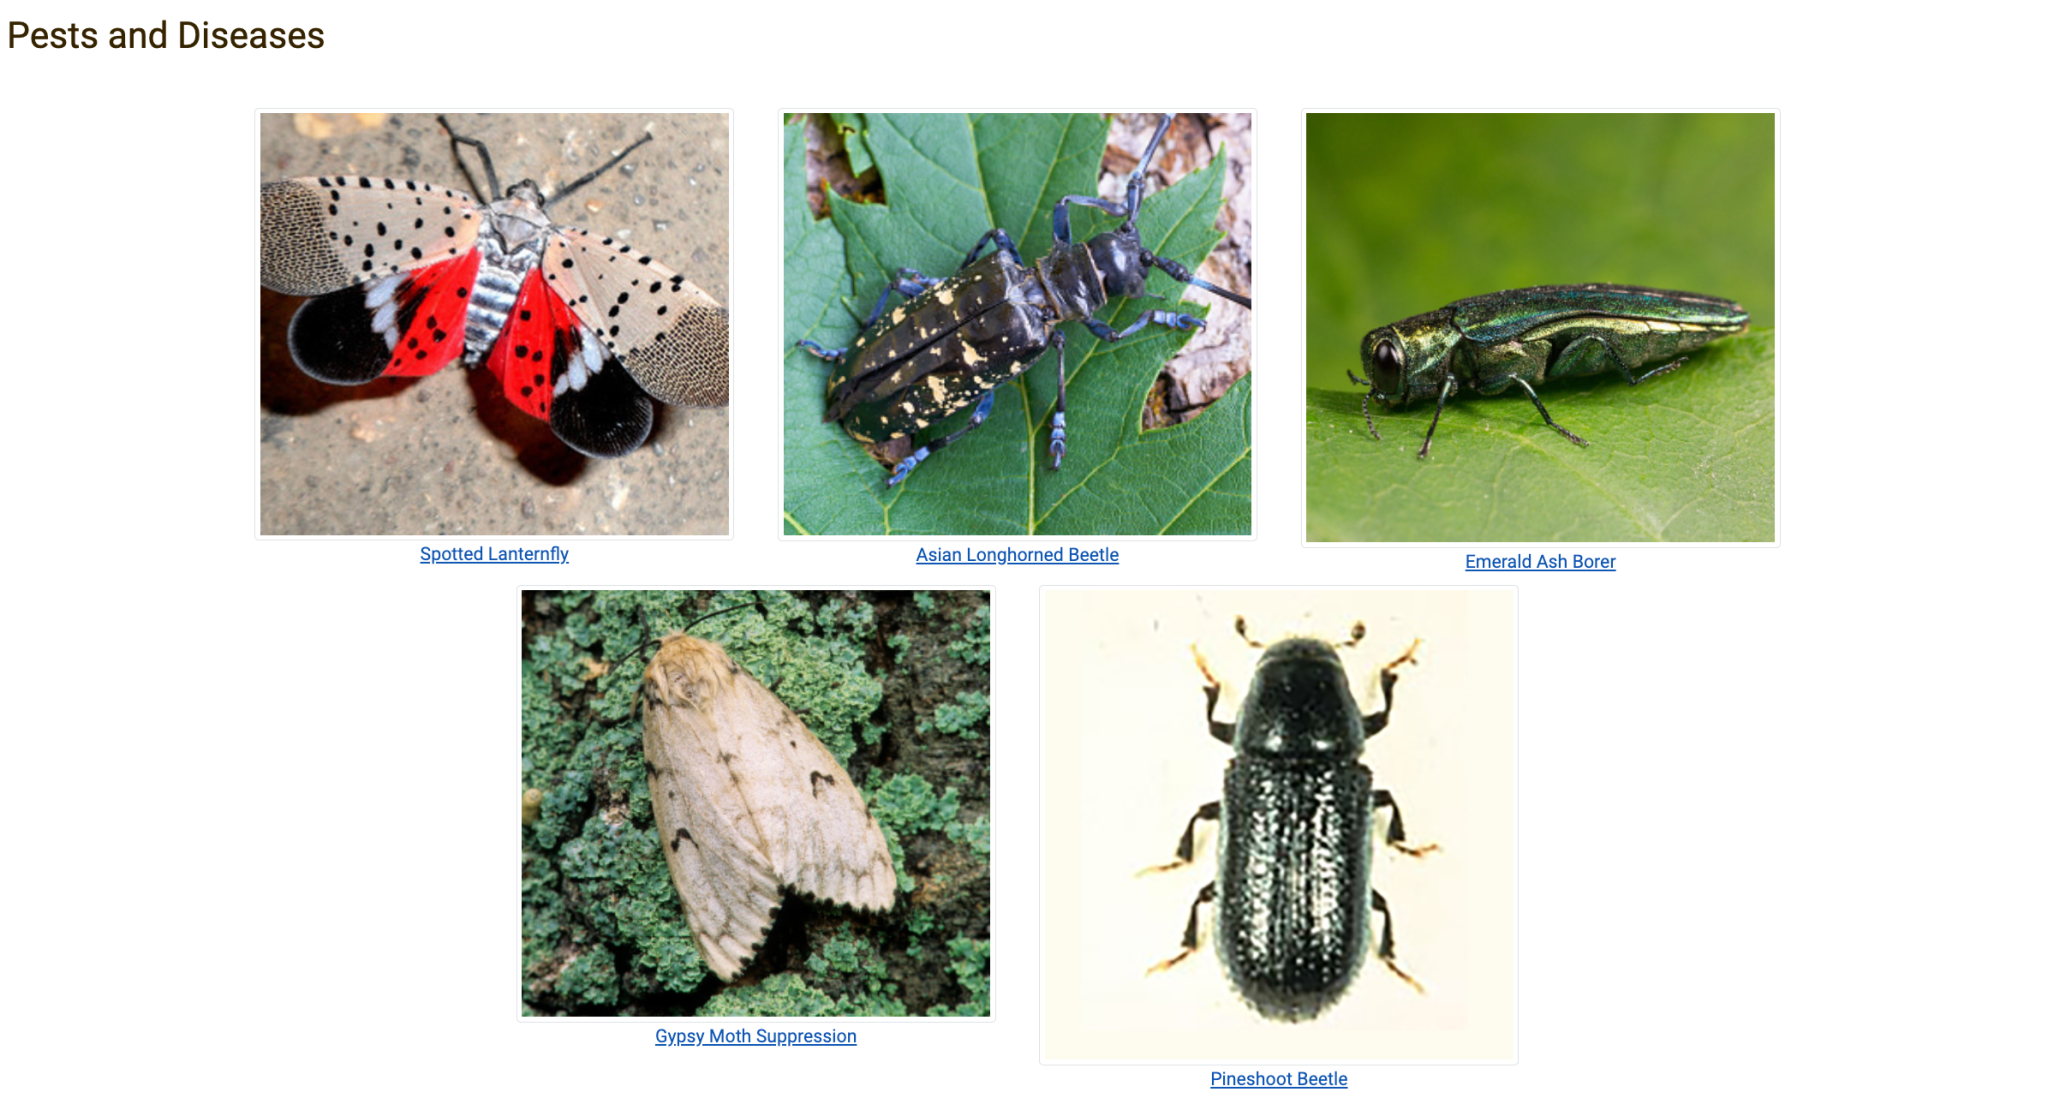 Department of Agriculture Pests and Diseases